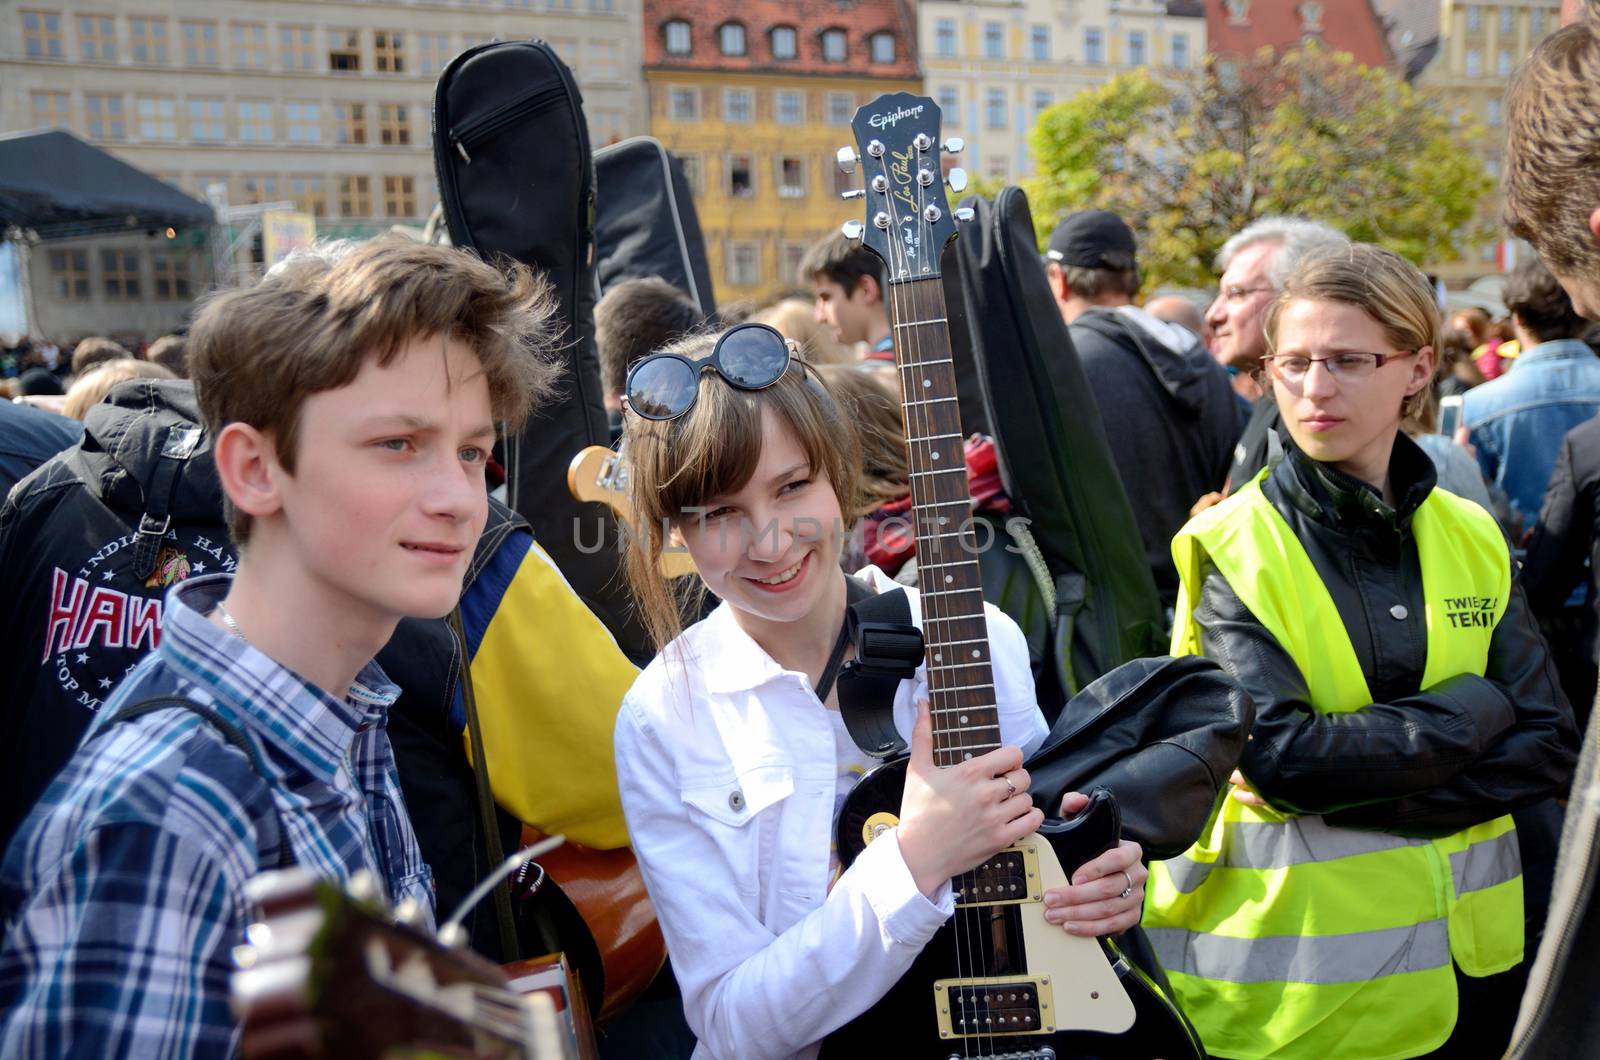 WROCLAW, POLAND - MAY 1: Unidentified group of young people play Hey Joe during Thanks Jimi Festival on 1st May 2016 in Wroclaw, Poland.